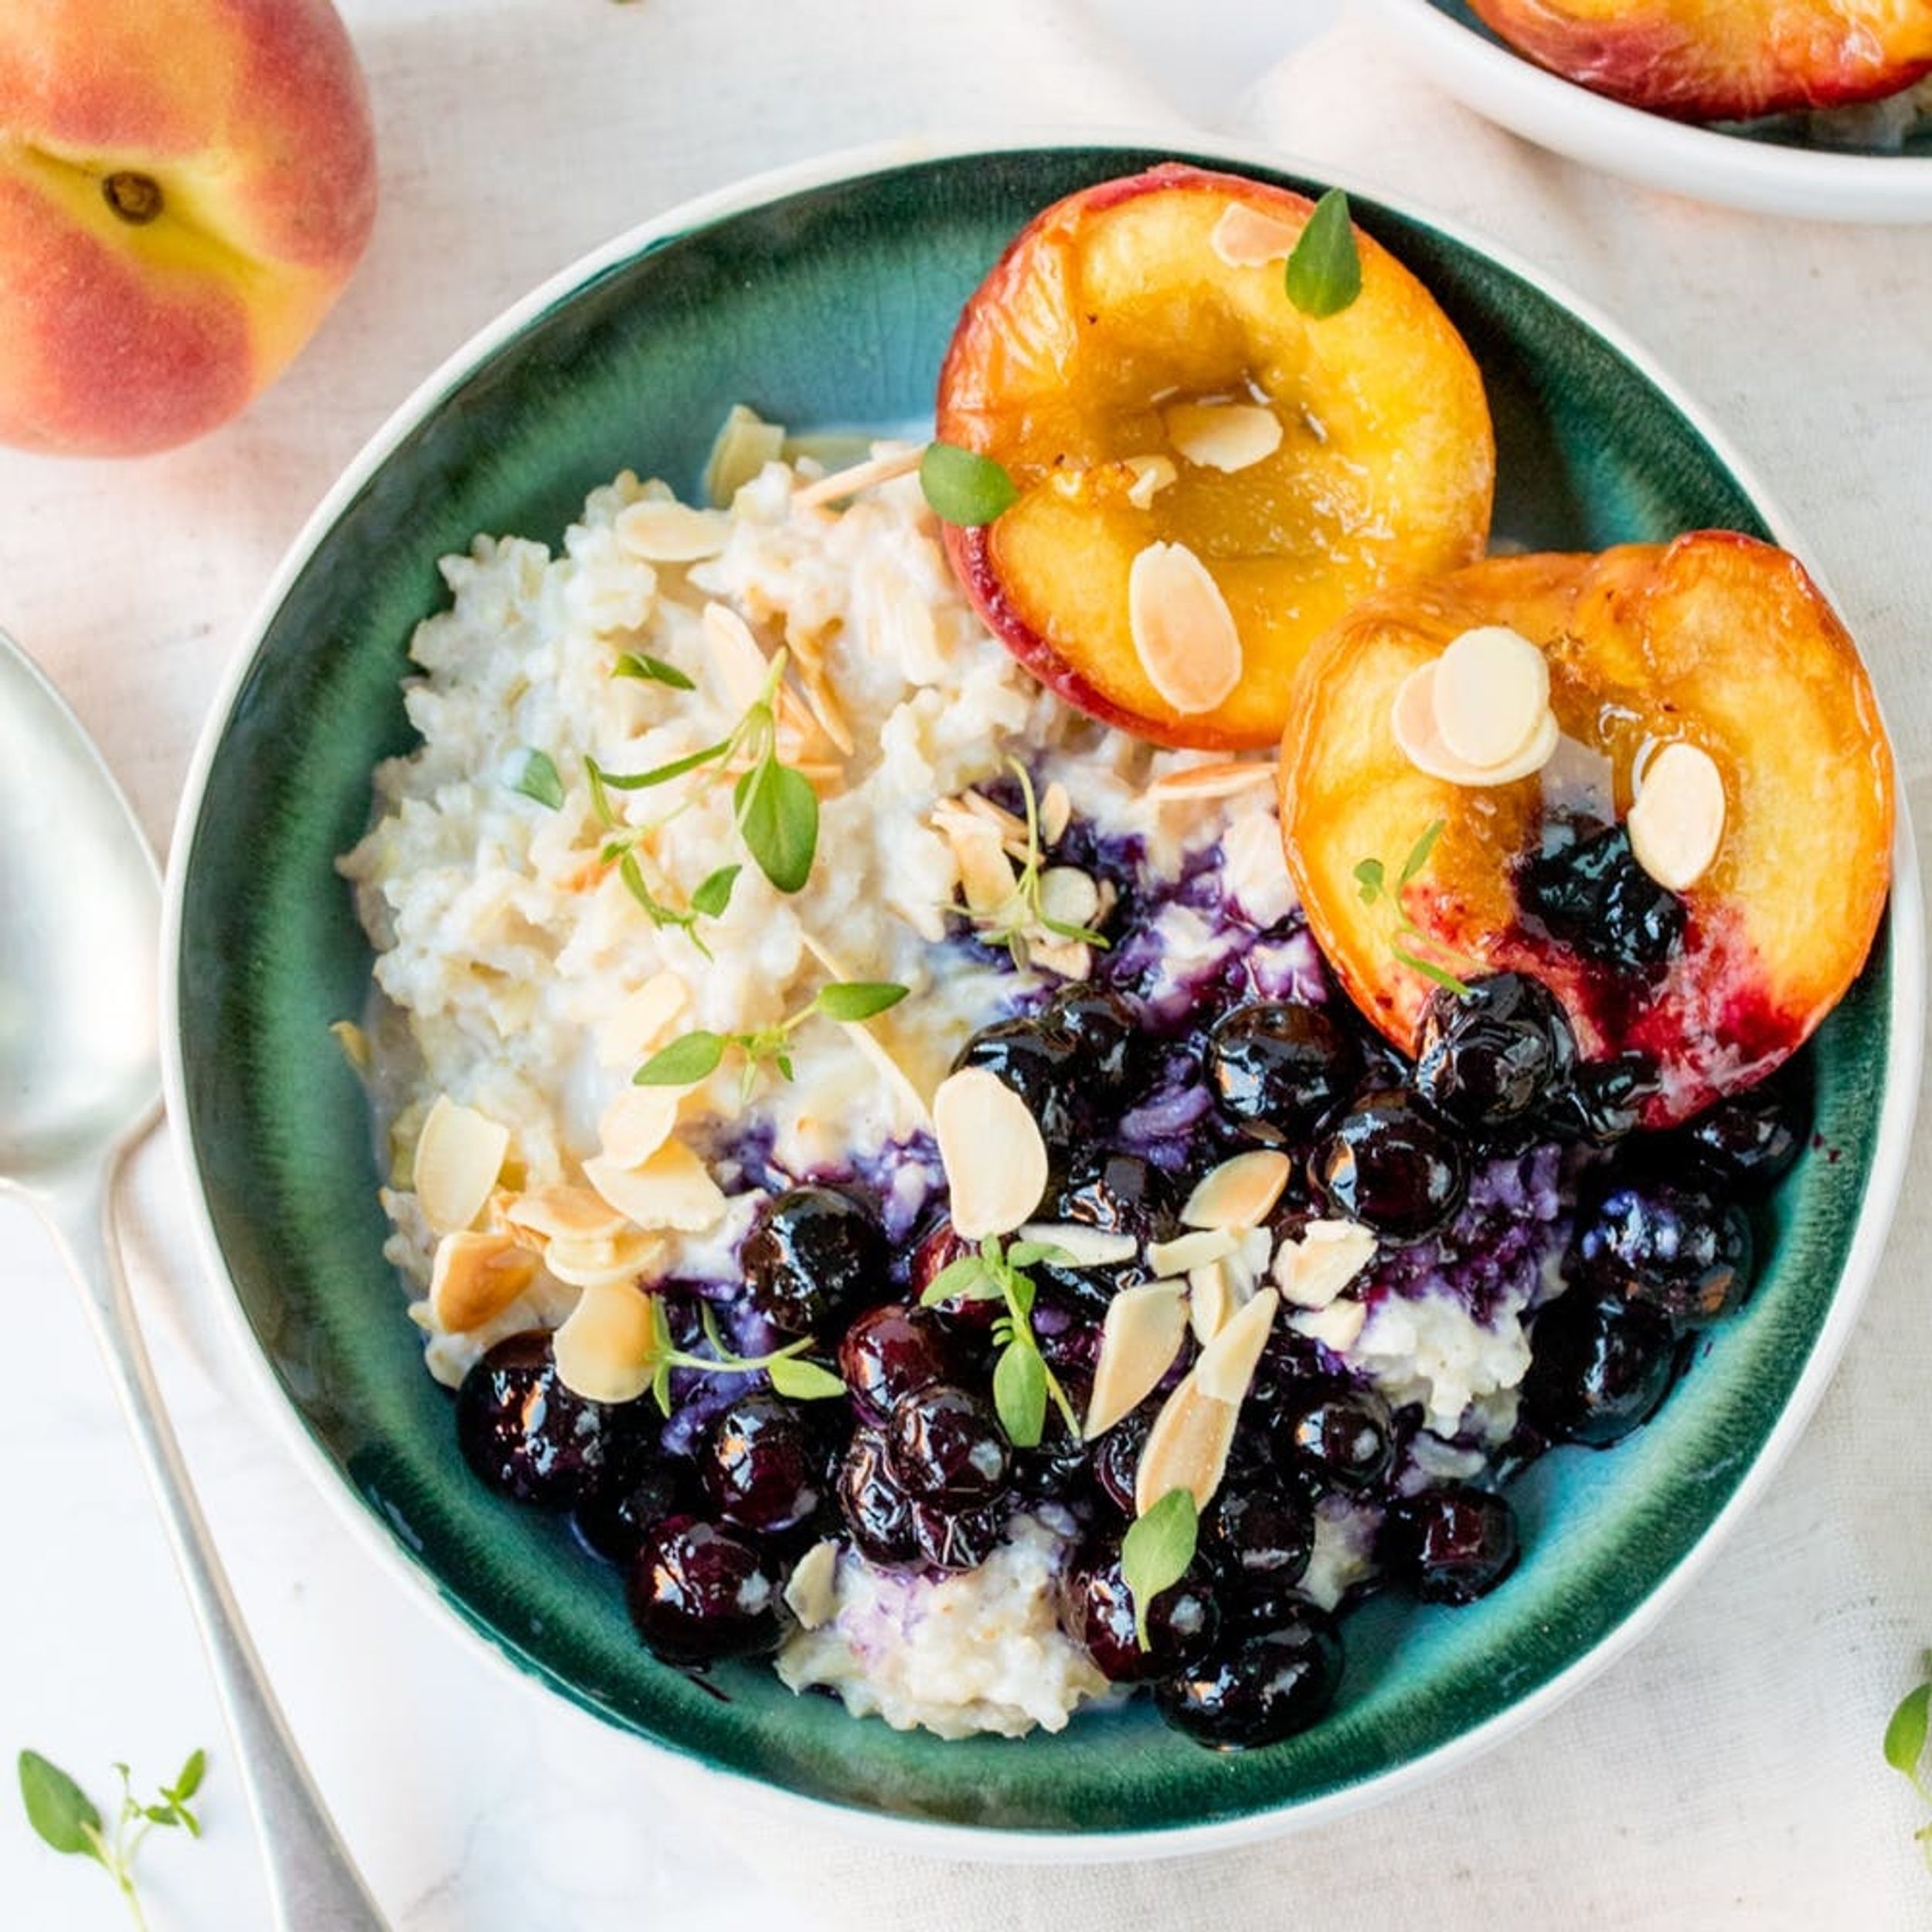 Try Our Gluten-Free Brown Rice Oatmeal With Roast Peaches And Blueberries